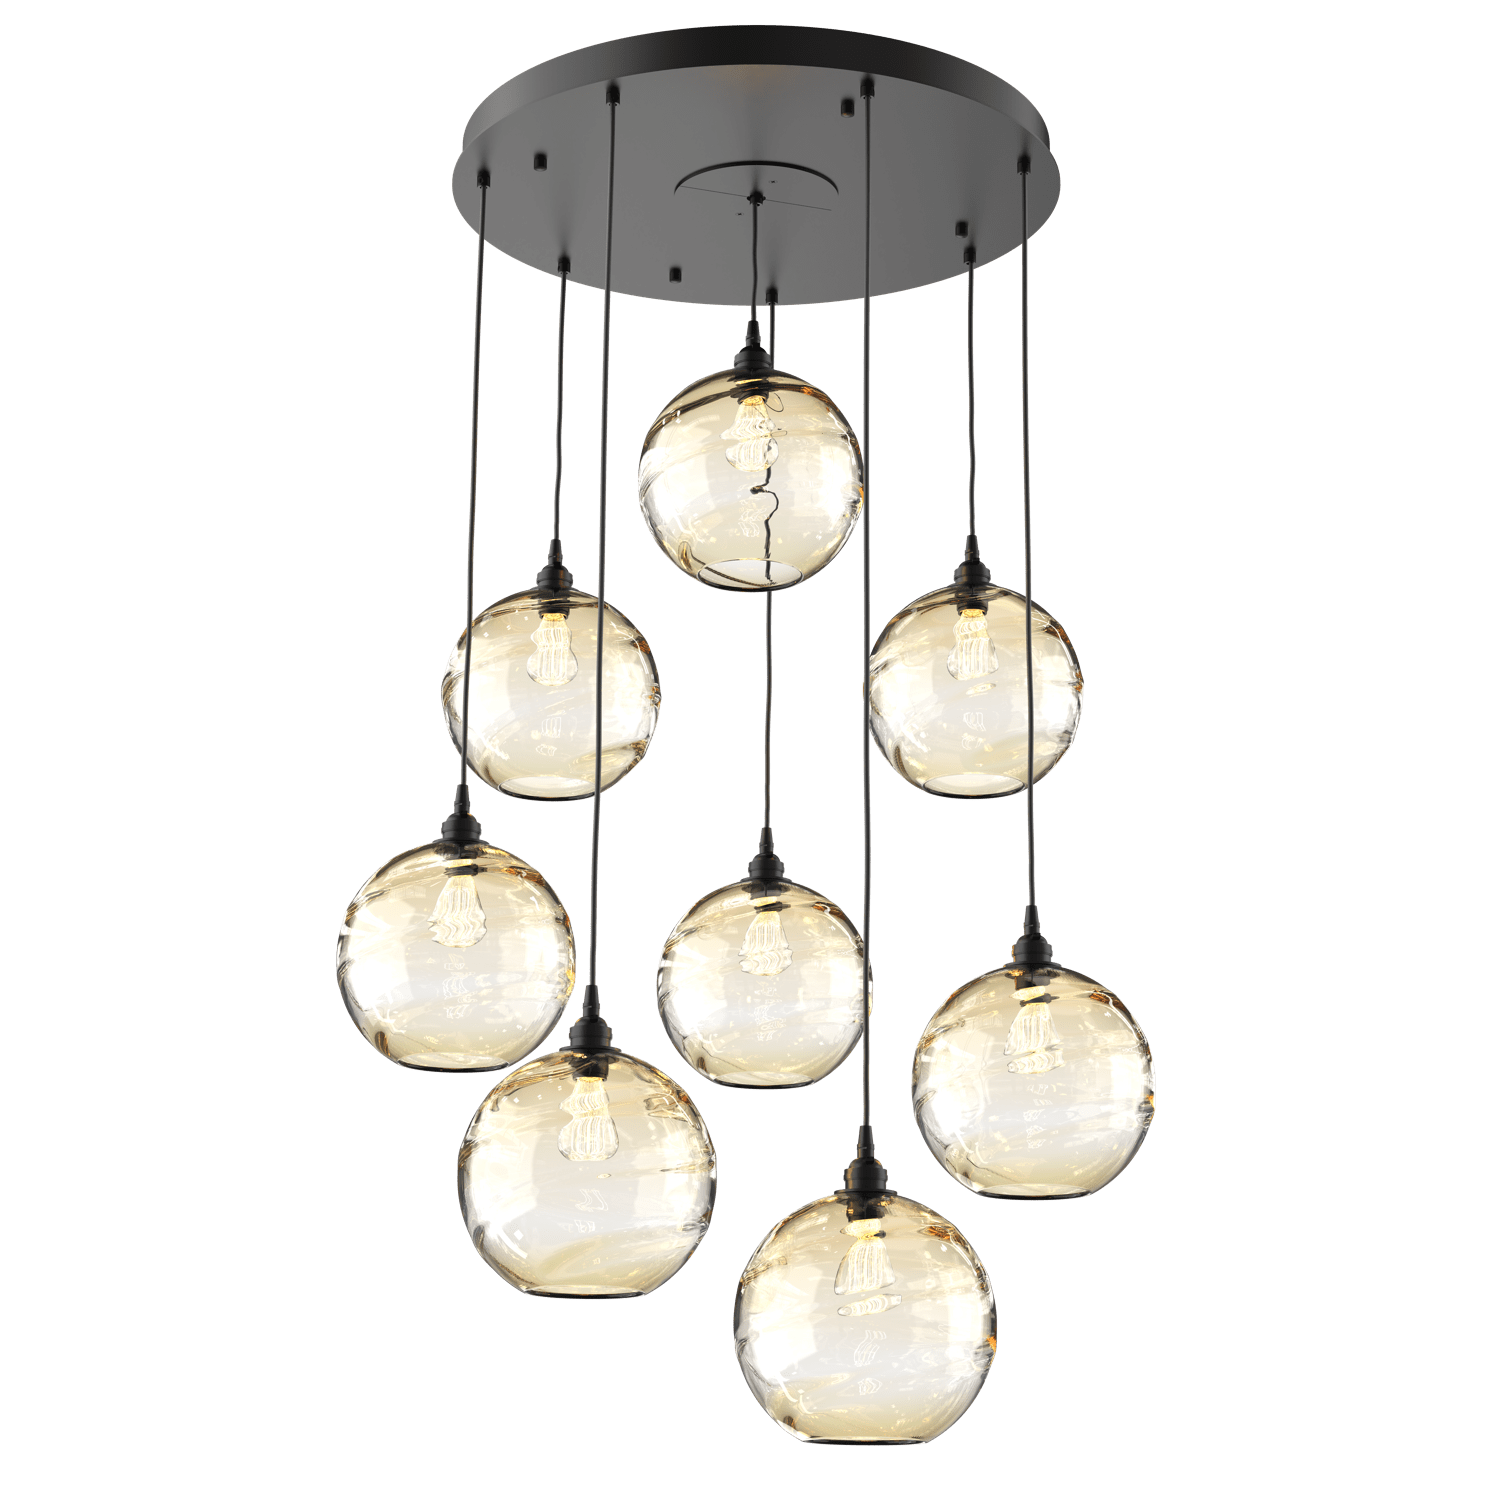 CHB0047-08-MB-OA-Hammerton-Studio-Optic-Blown-Glass-Terra-8-light-round-pendant-chandelier-with-matte-black-finish-and-optic-amber-blown-glass-shades-and-incandescent-lamping